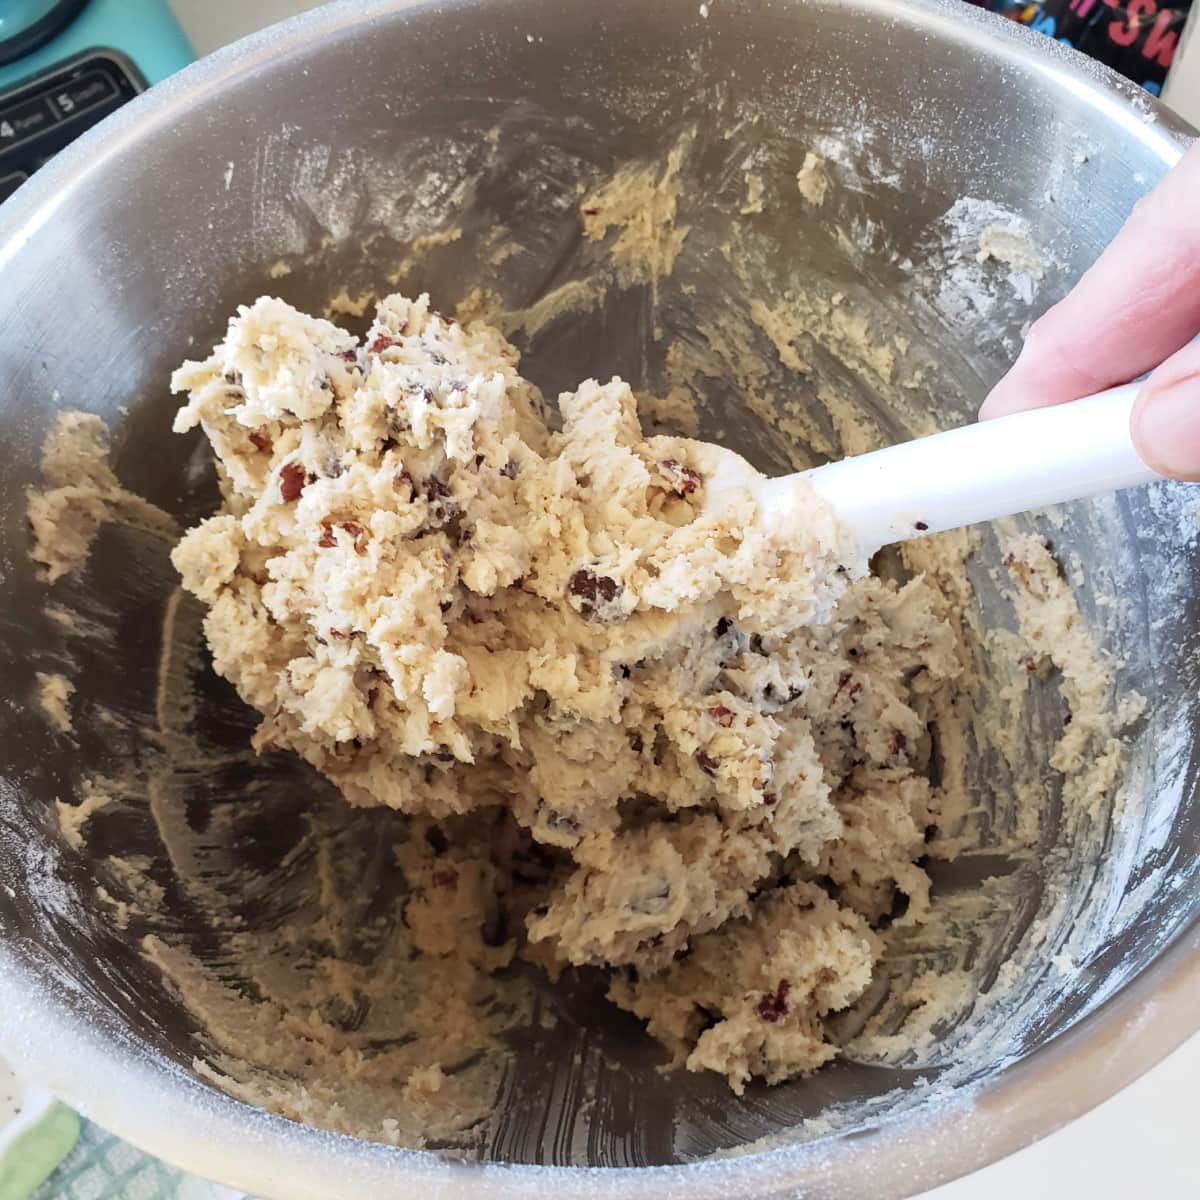 Hand holding a white spoon stirs chocolate chips and pecans into the dough